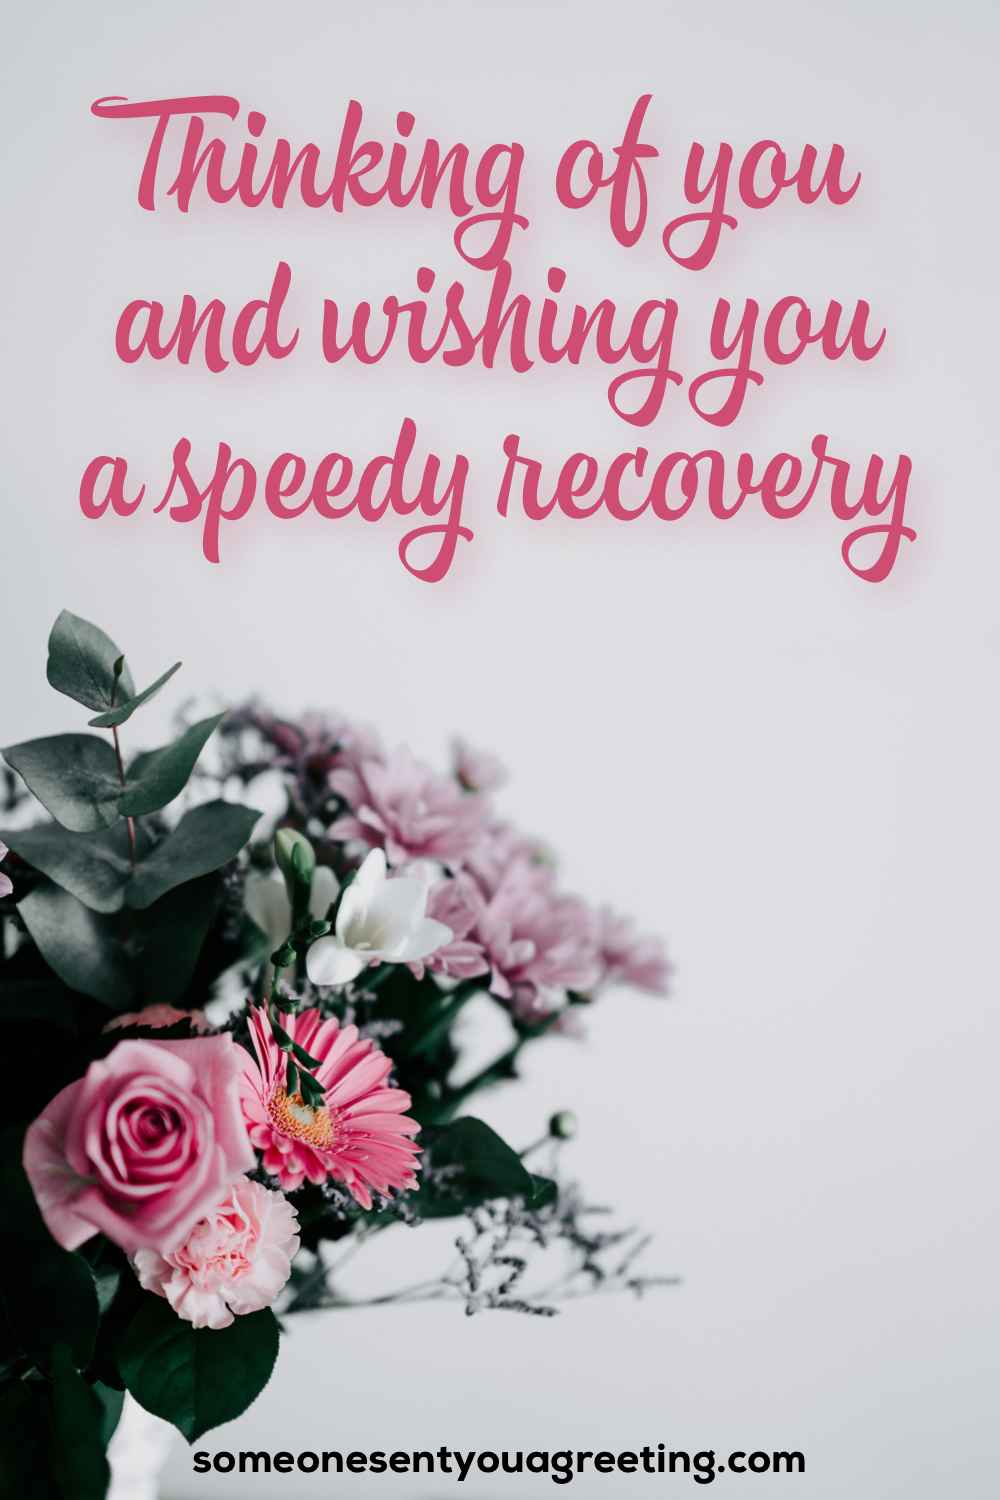 Top 999+ speedy recovery images – Amazing Collection speedy recovery ...